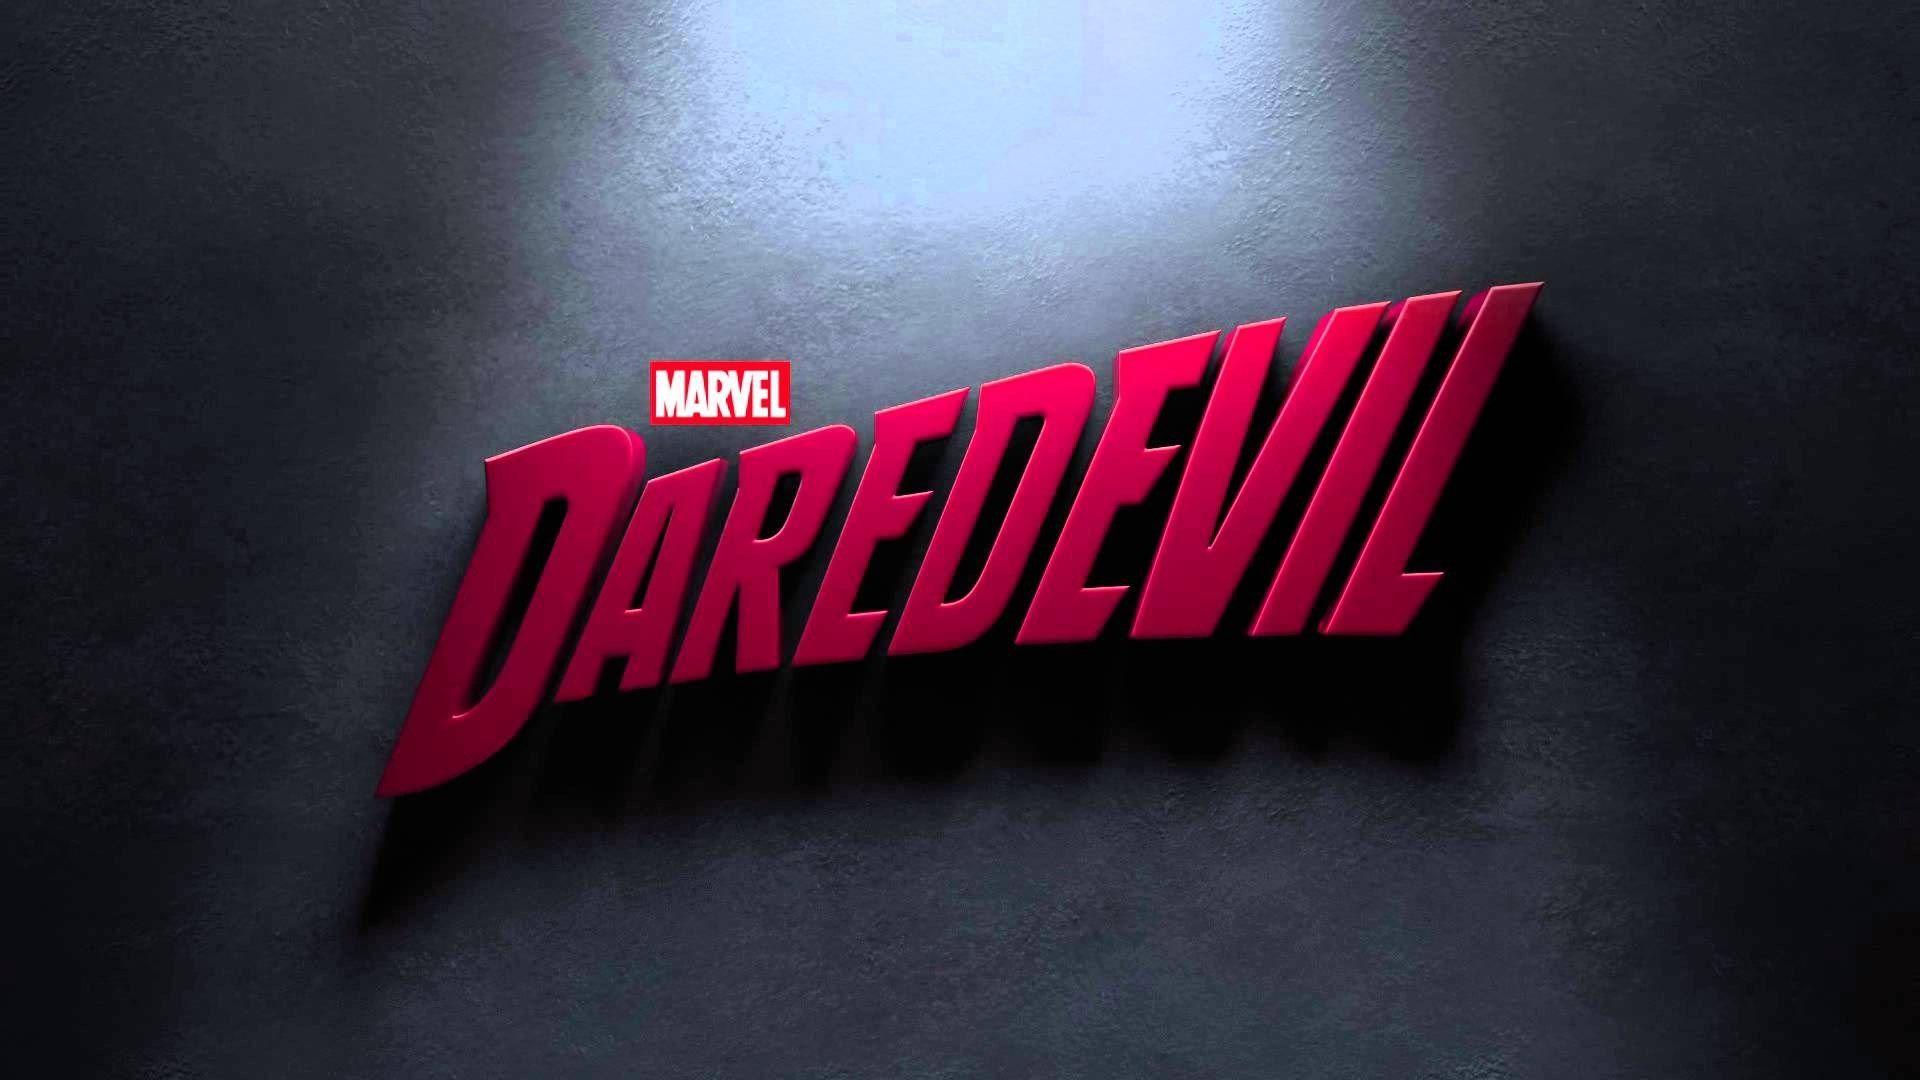 daredevil HD wallpaper picture. wallpaper and backgronds